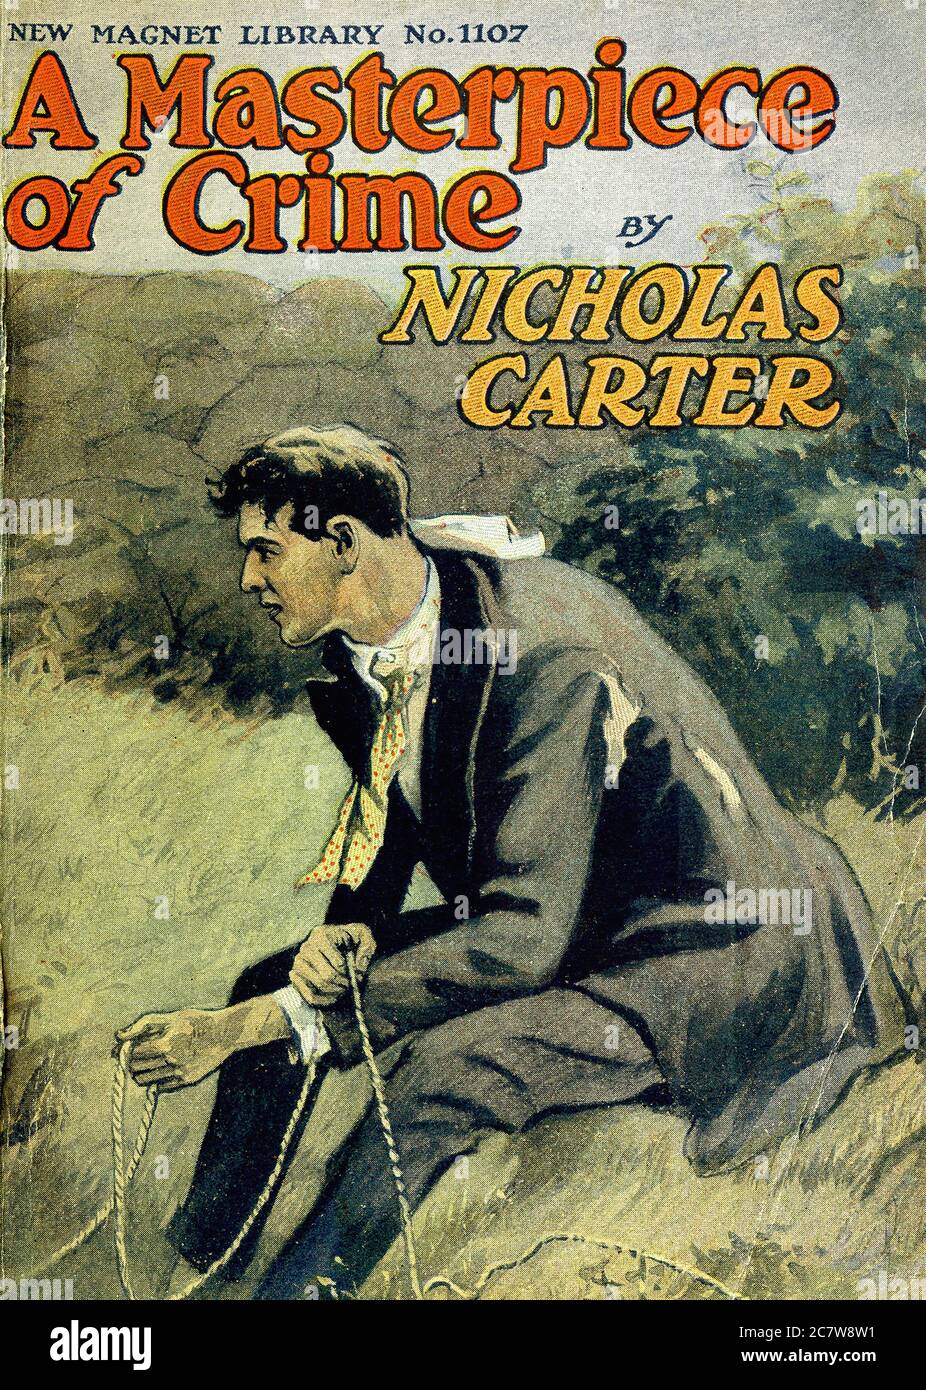 Nicholas Carter - A Masterpiece of Crime - New Magnet Library - Vintage Pulp Literary Stock Photo